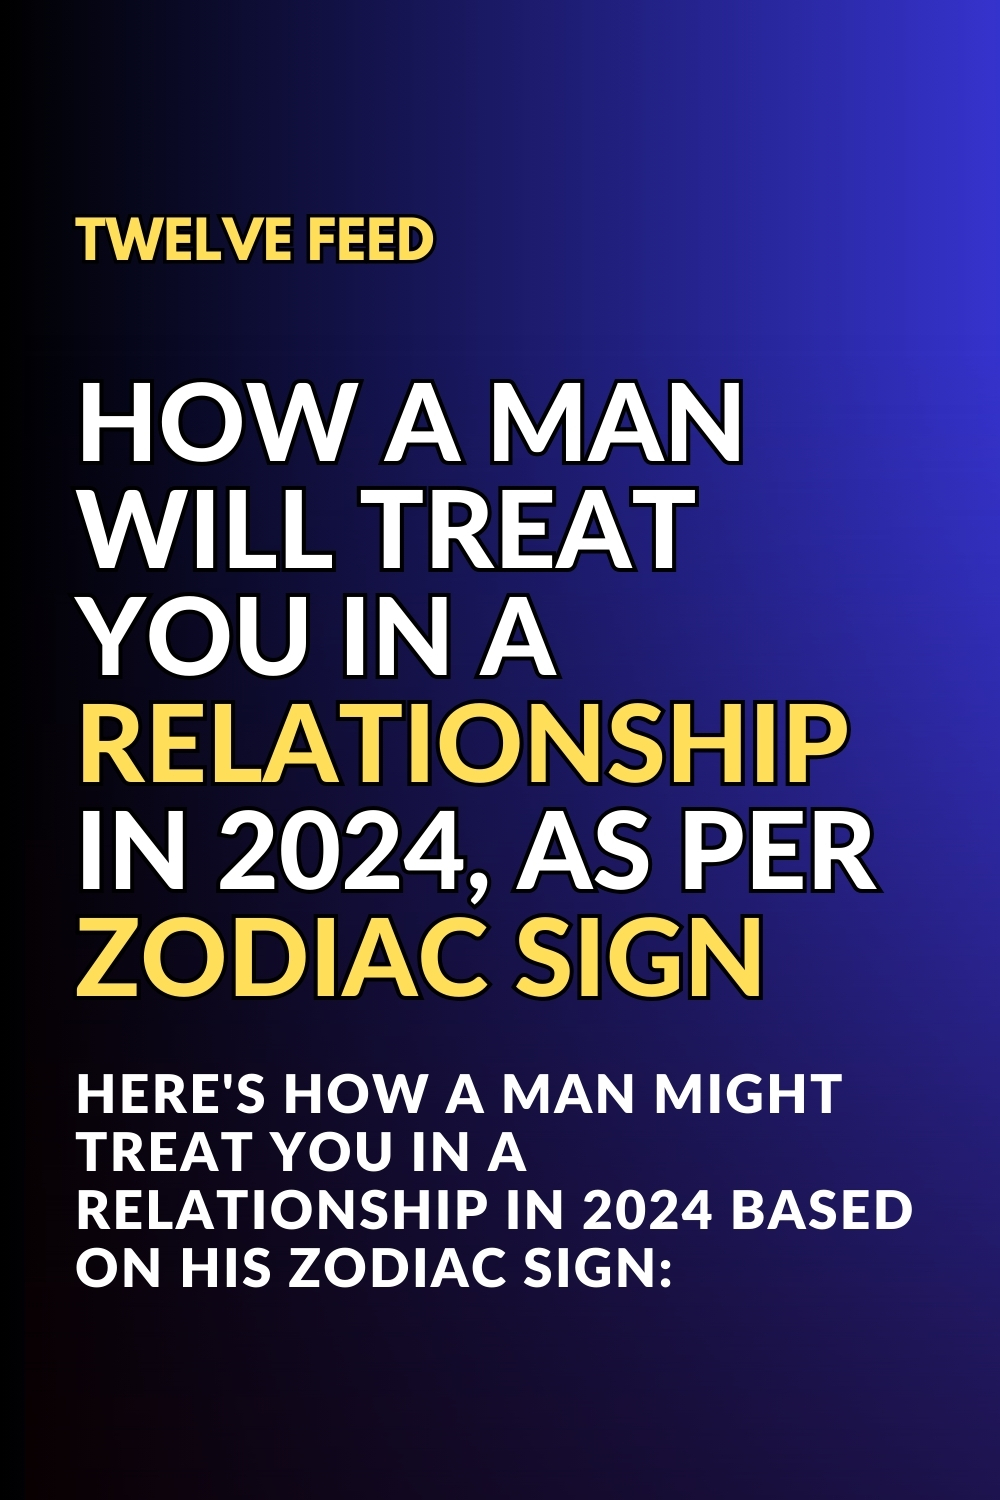 How A Man Will Treat You In A Relationship In 2024, As Per Zodiac Sign